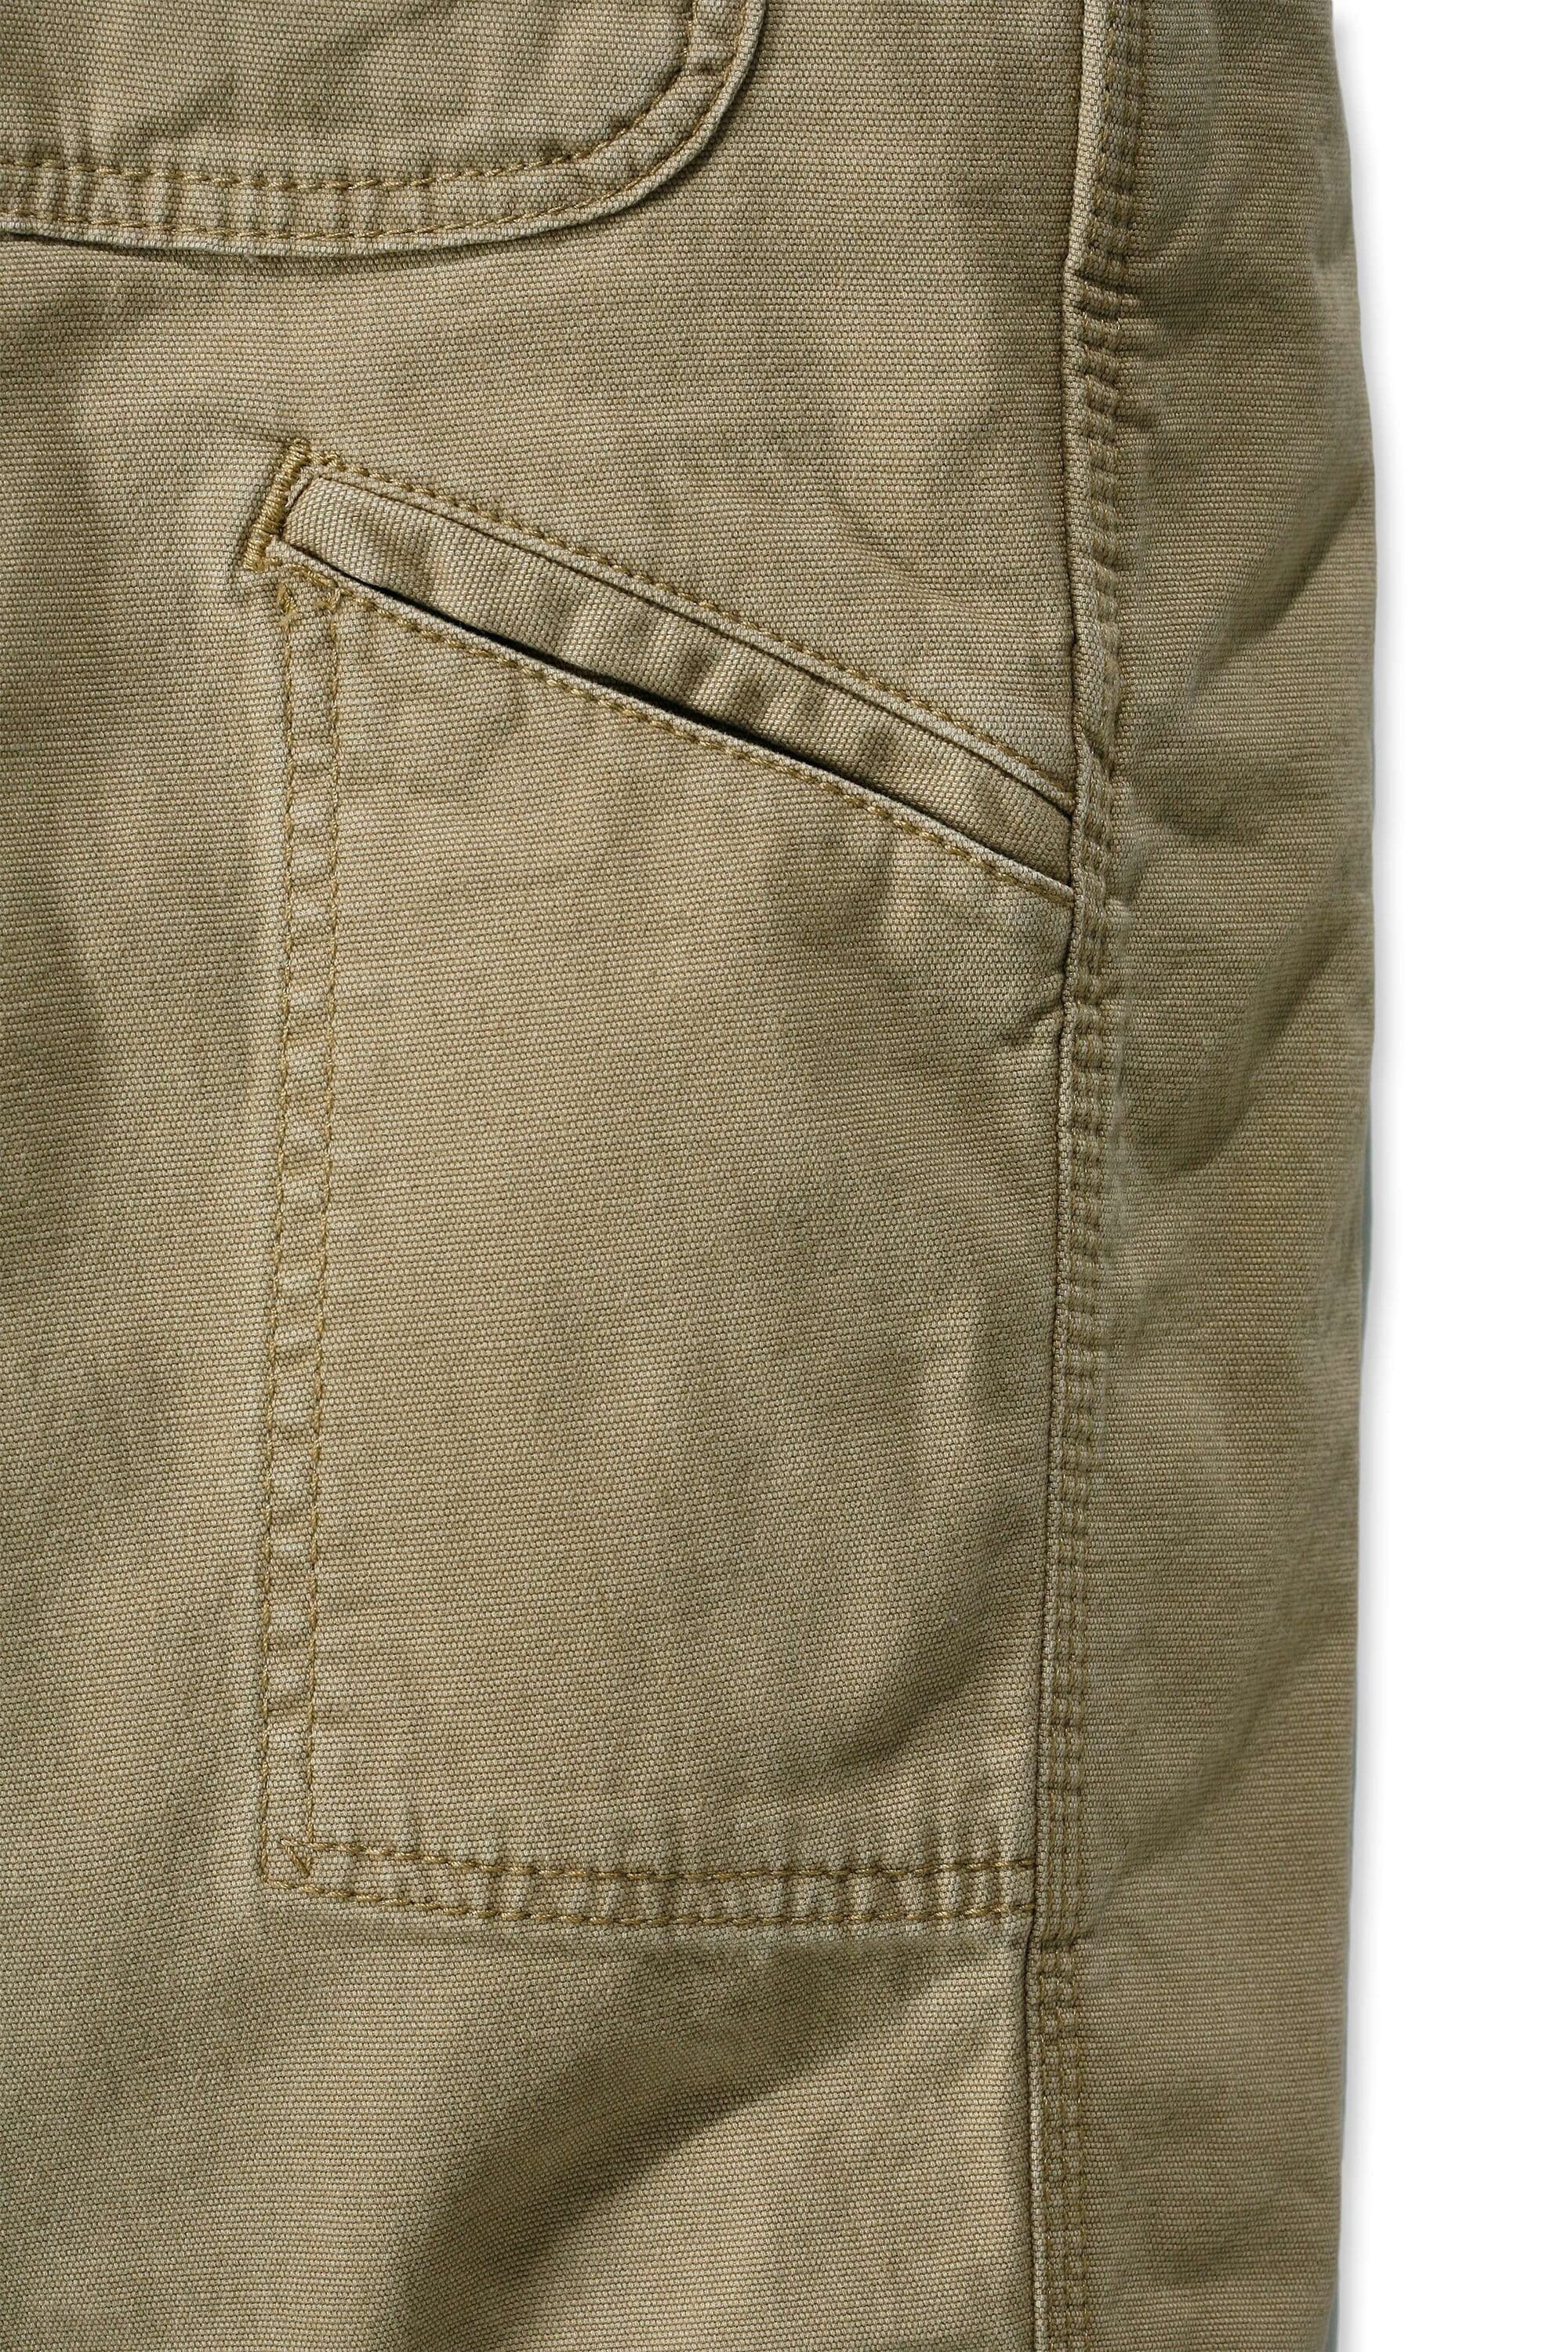 Carhartt Men's Relaxed Fit Dark Khaki Canvas Work Pants (29 X 32) in the  Pants department at